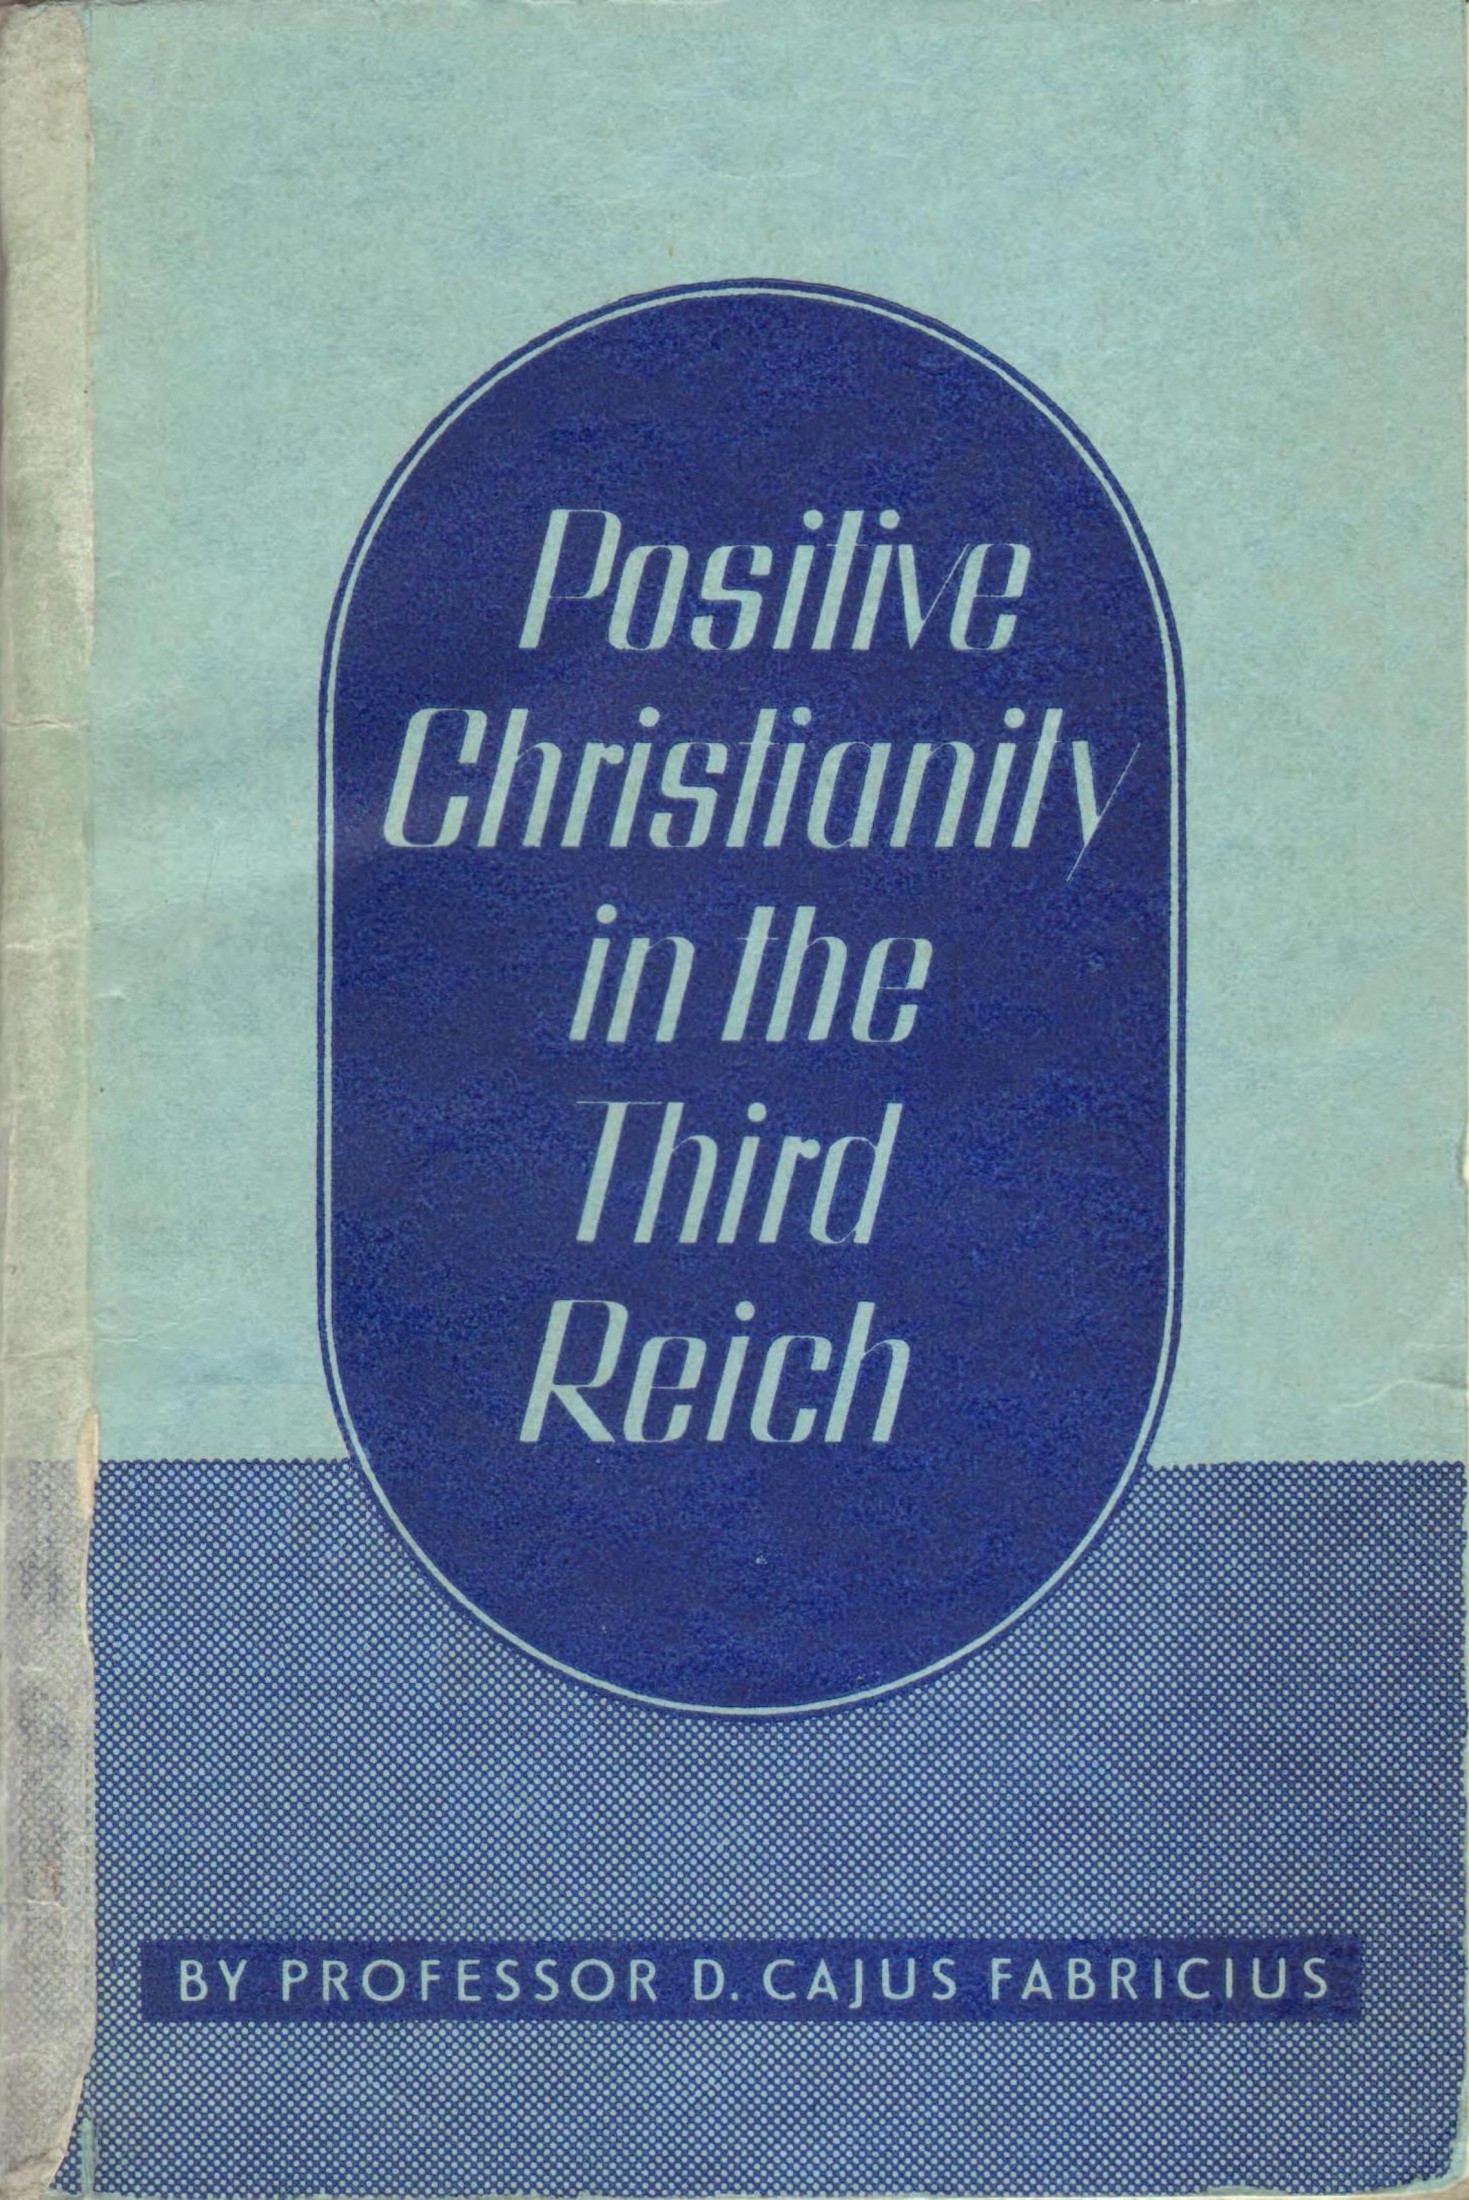 Positive Christianity in the Third Reich (1937) by D. Cajus Fabricius